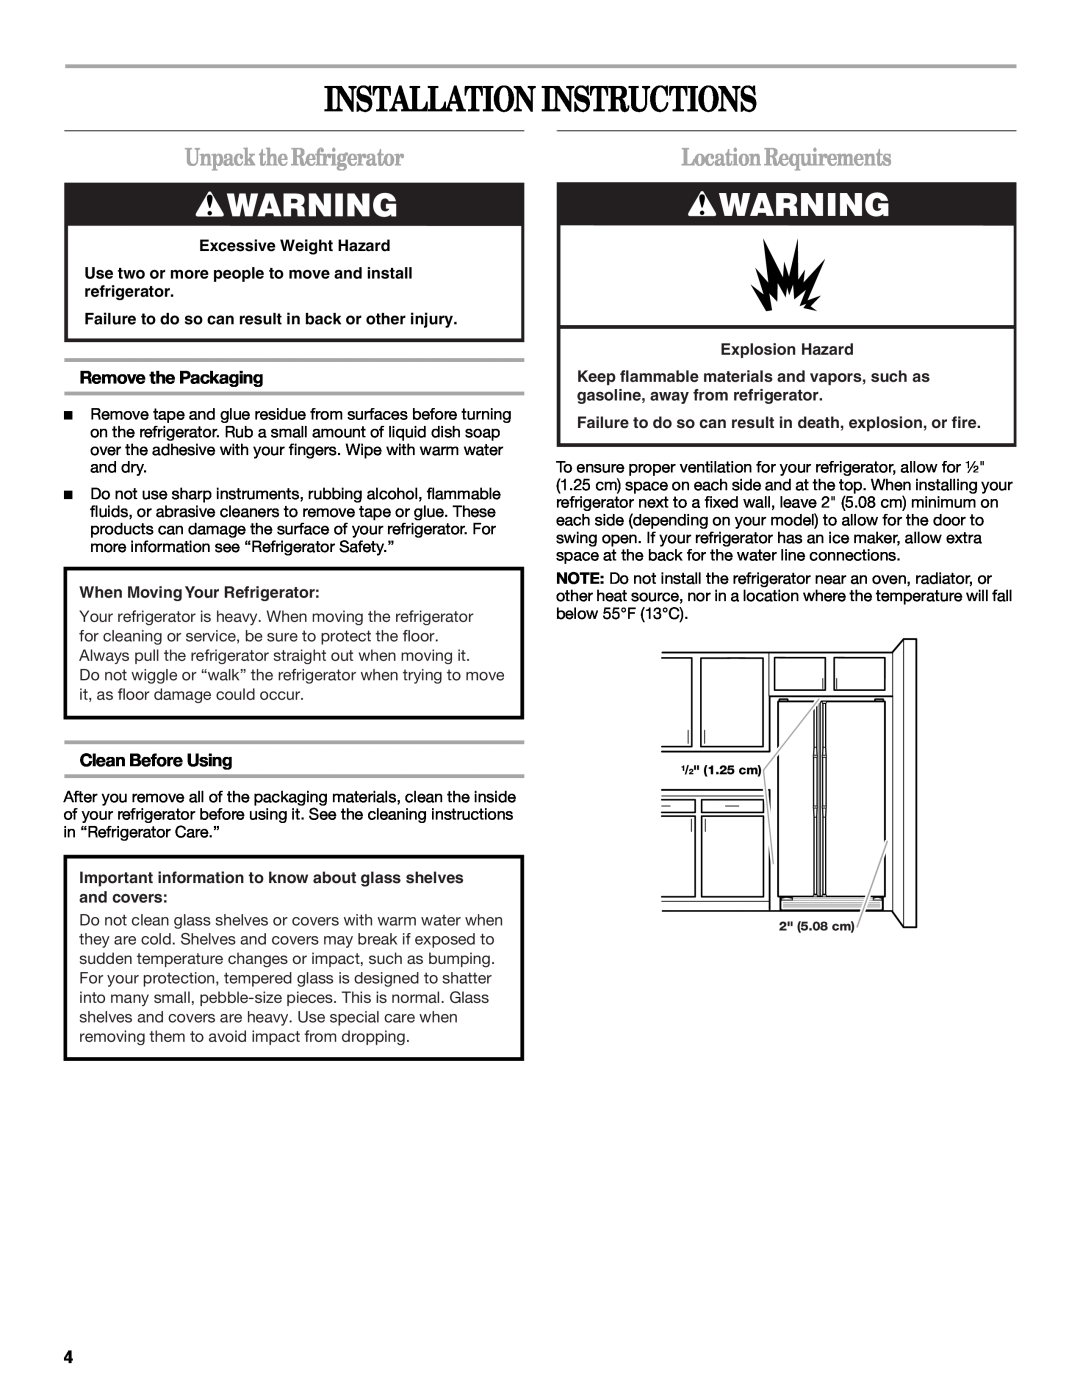 Whirlpool 2308045 manual Installation Instructions, UnpacktheRefrigerator, LocationRequirements, Remove the Packaging 